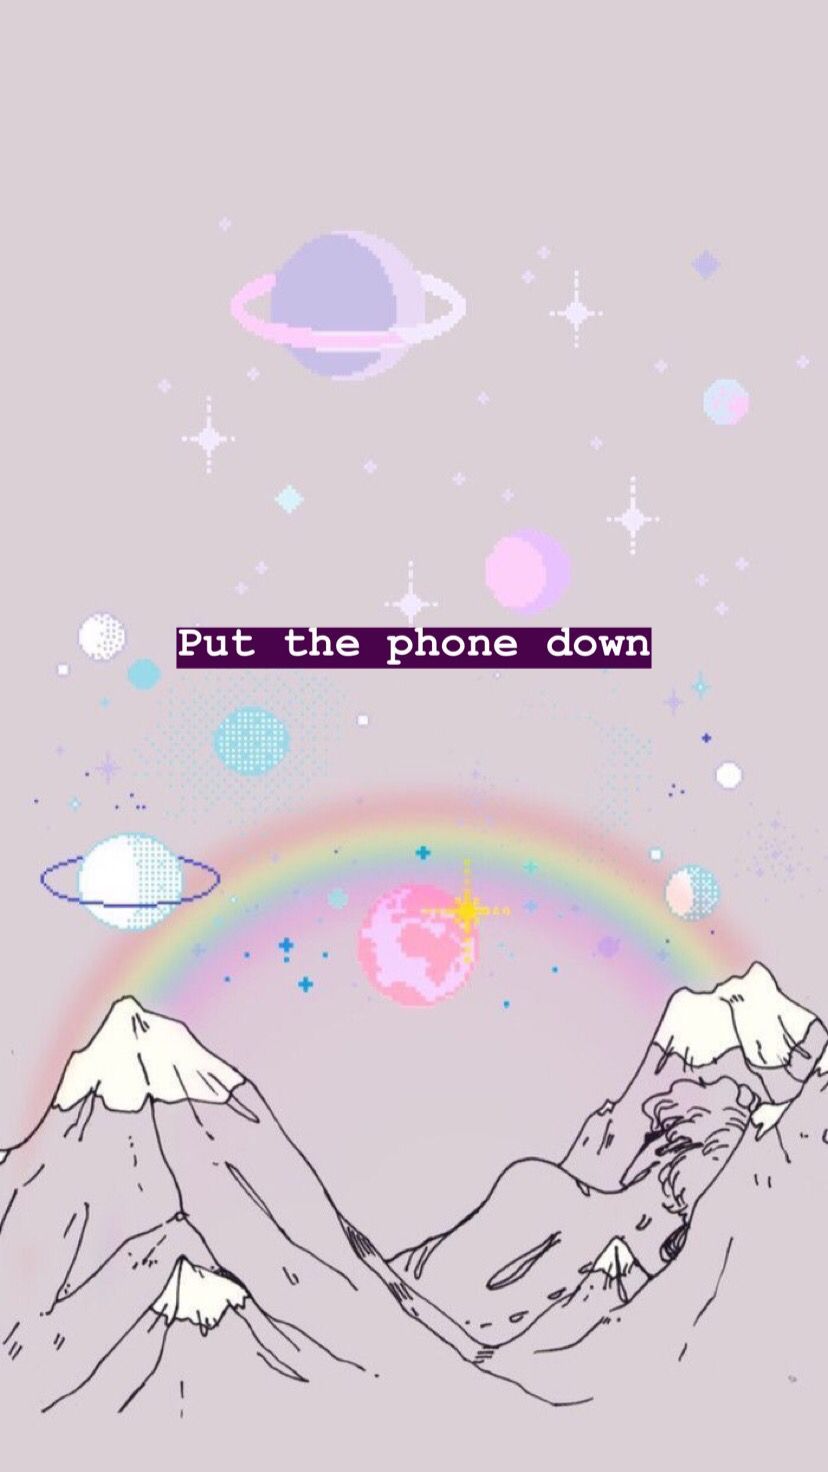 Download Put Down Your Phone and Enjoy the Moment Wallpaper  Wallpapers com